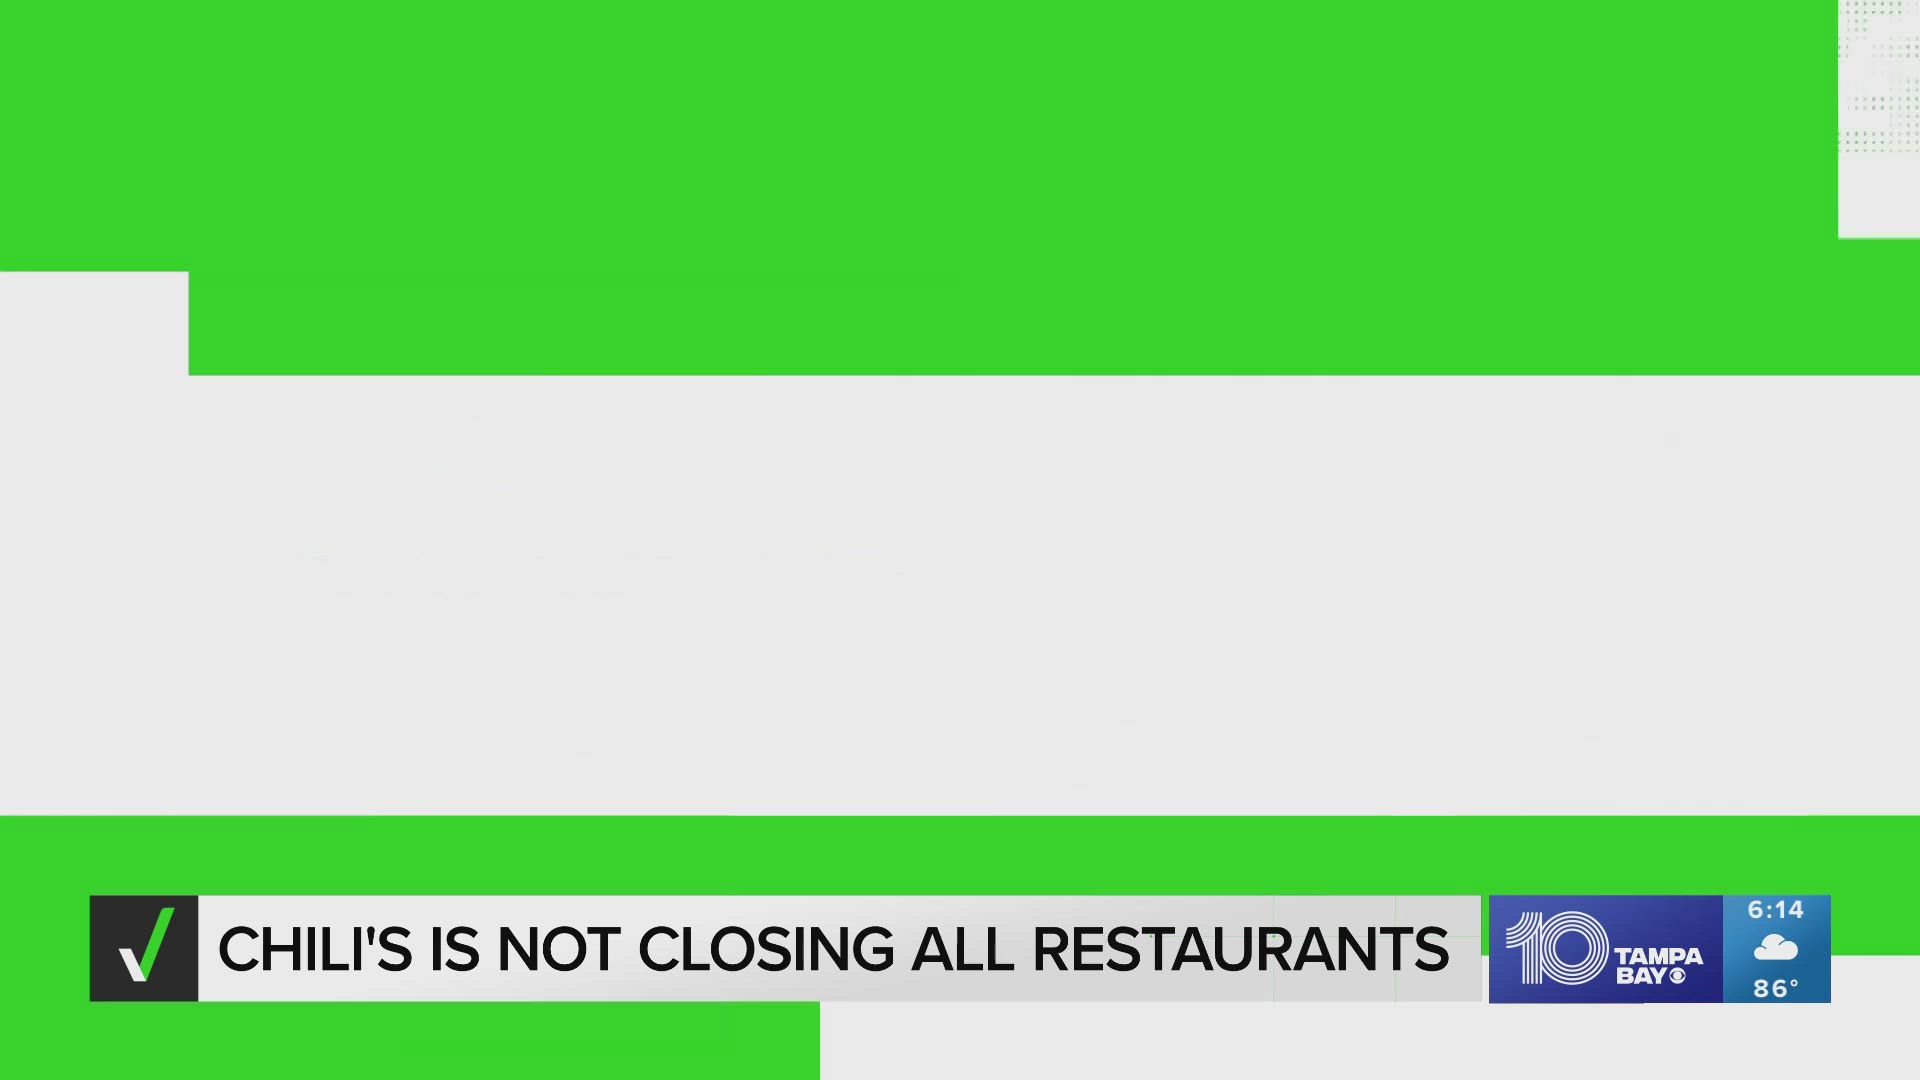 Multiple viral posts with millions of views claim that Chili’s is the latest chain shutting down all of its restaurants in the coming months.